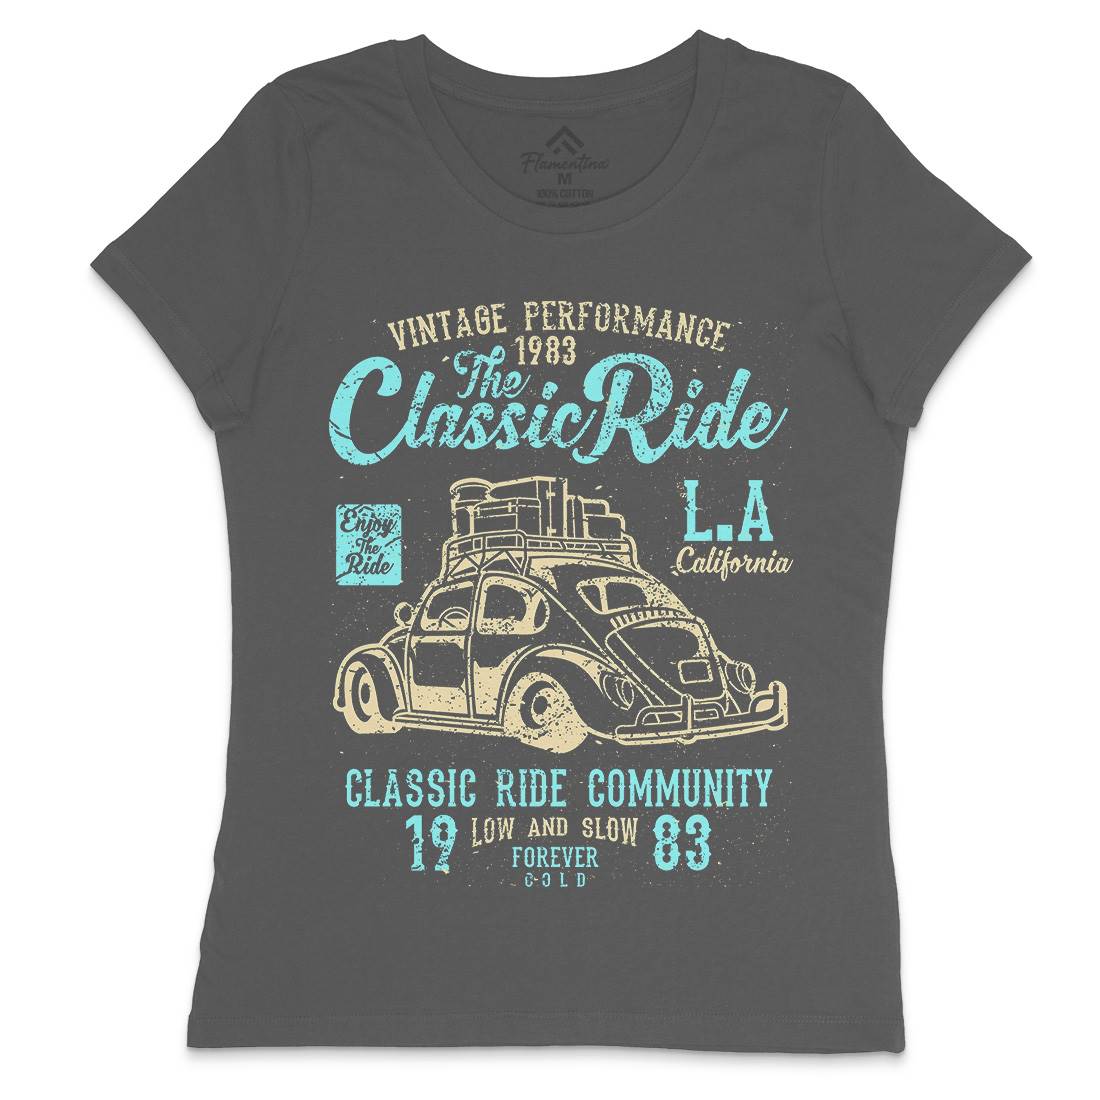 Classic Ride Womens Crew Neck T-Shirt Cars A171